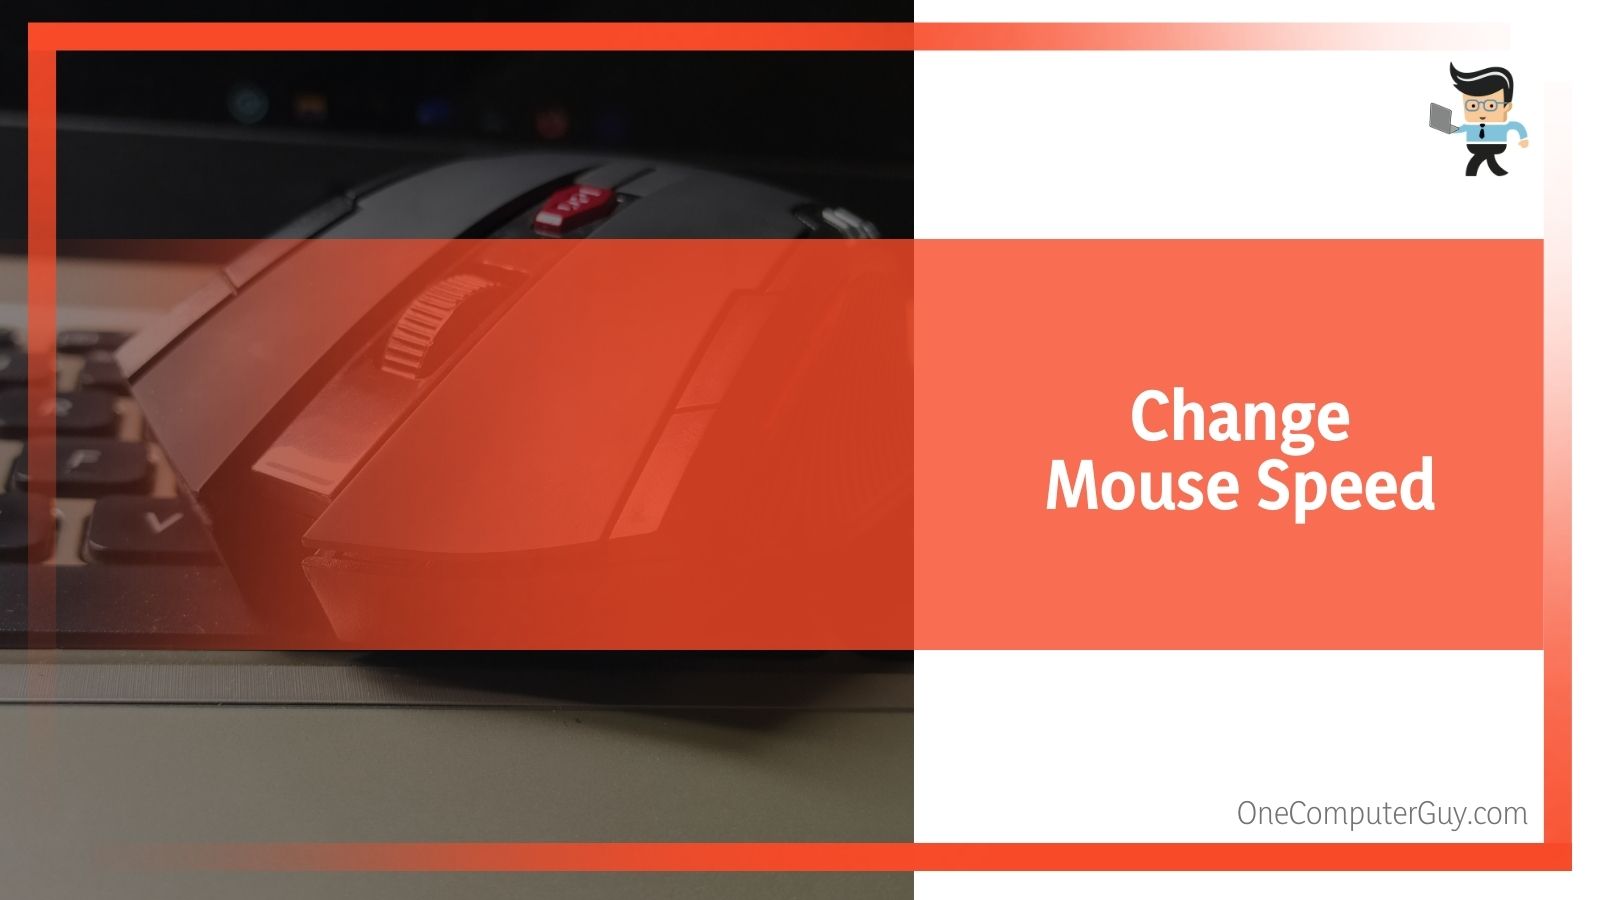 Change Mouse Speed